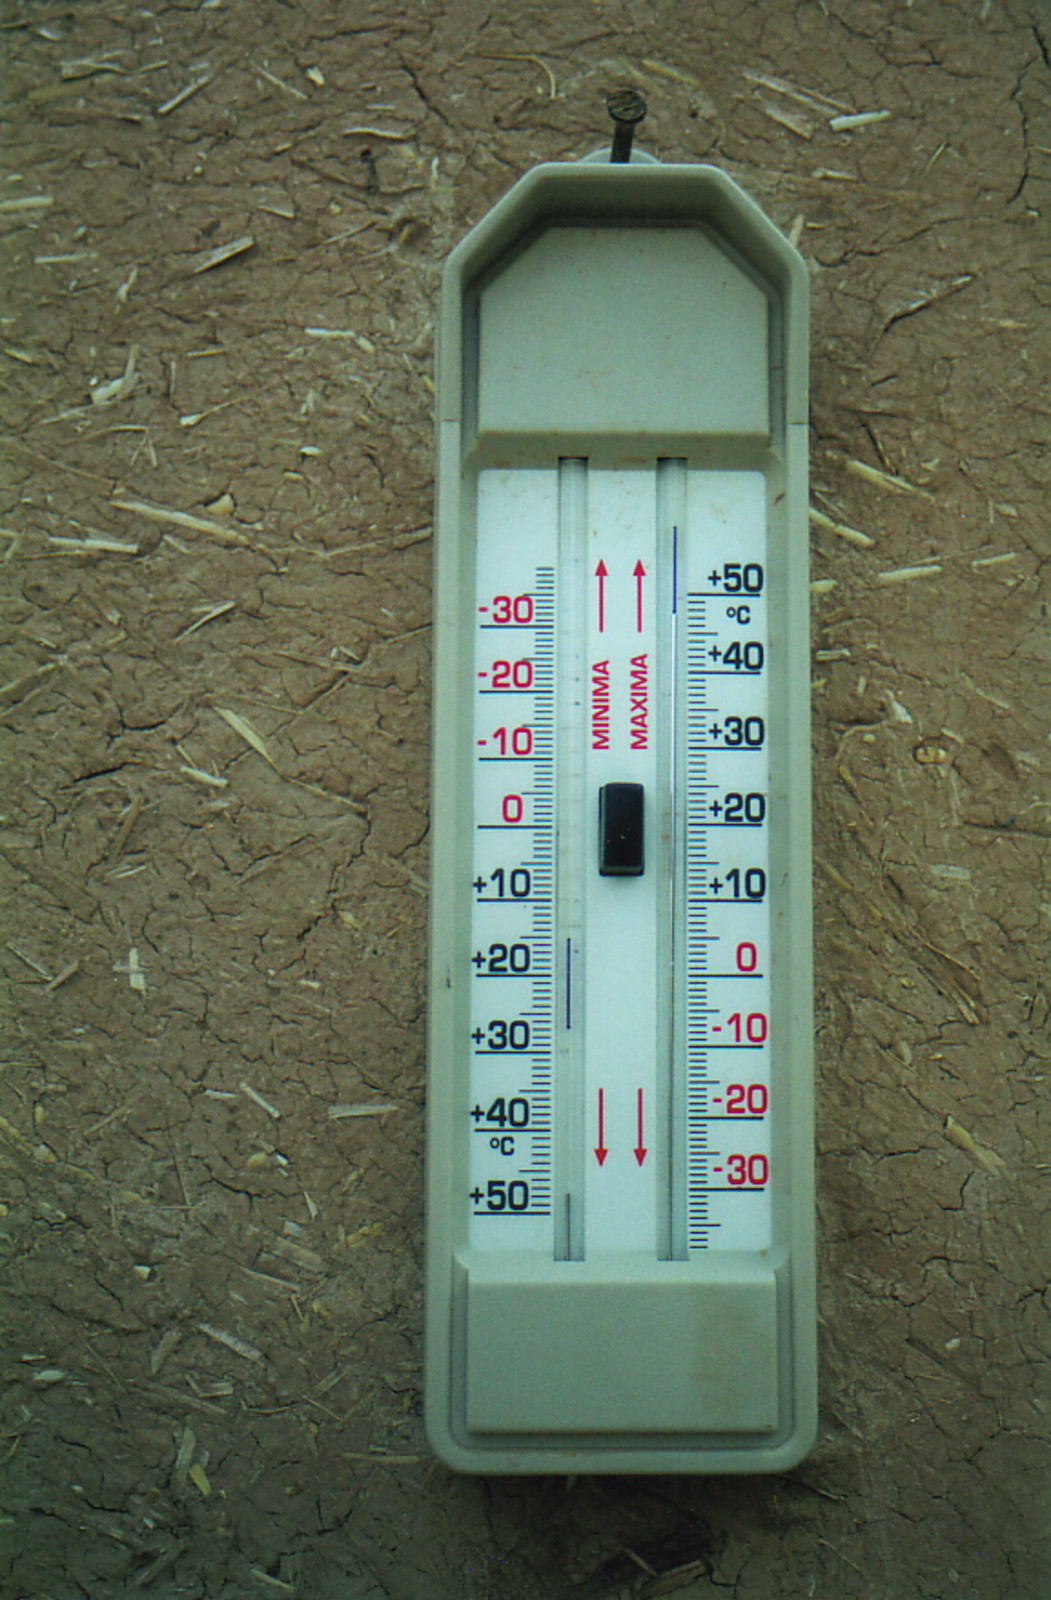 A thermometer showing 48°C in the shade